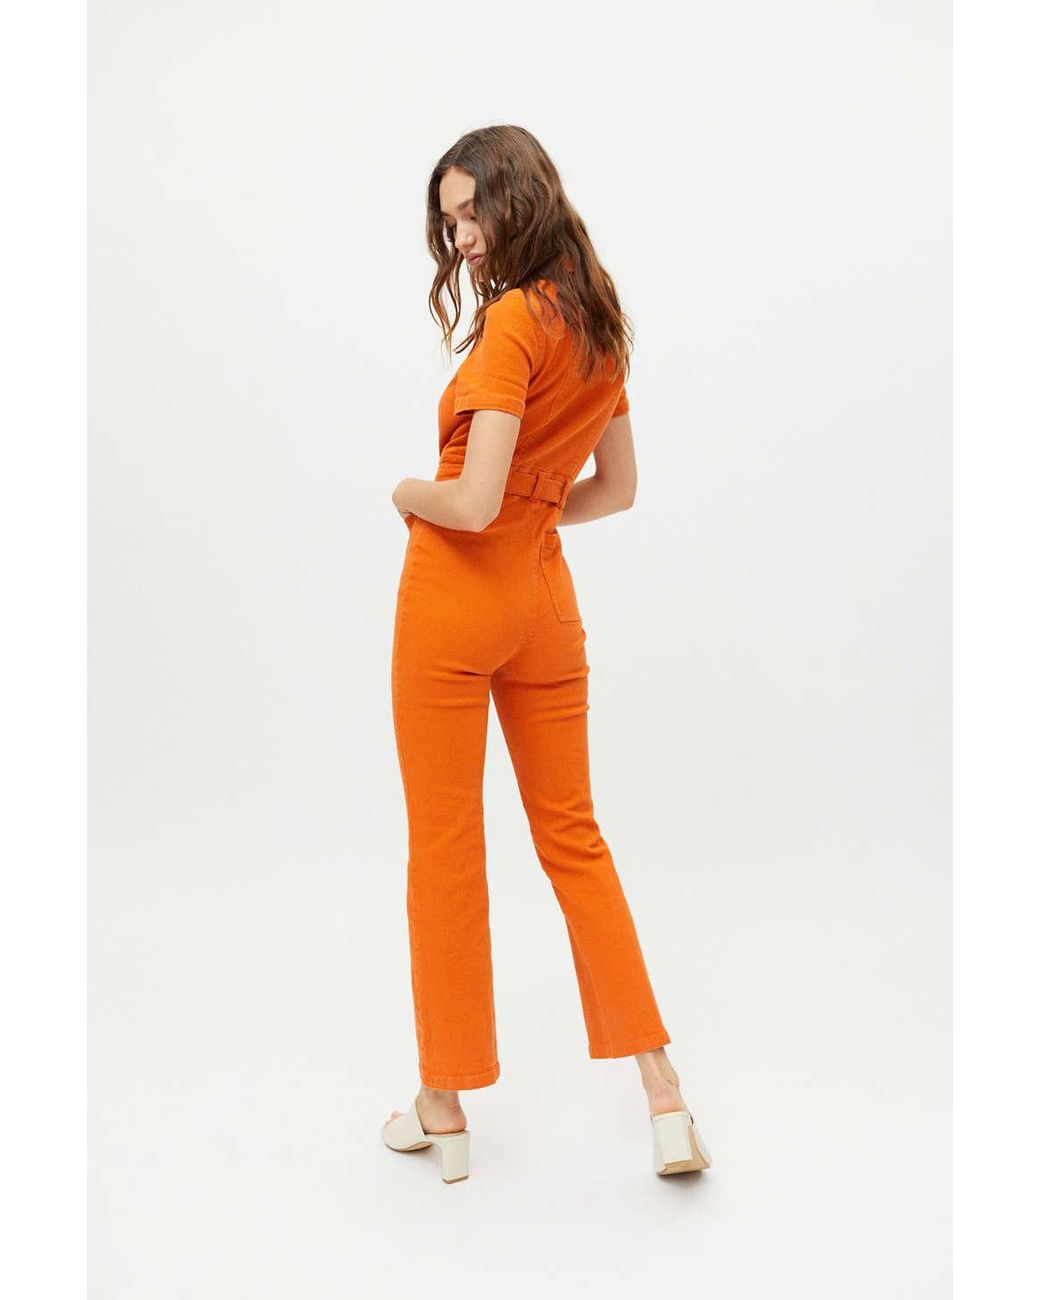 Urban Outfitters Uo Stephie Short Sleeve Coverall Jumpsuit in Orange